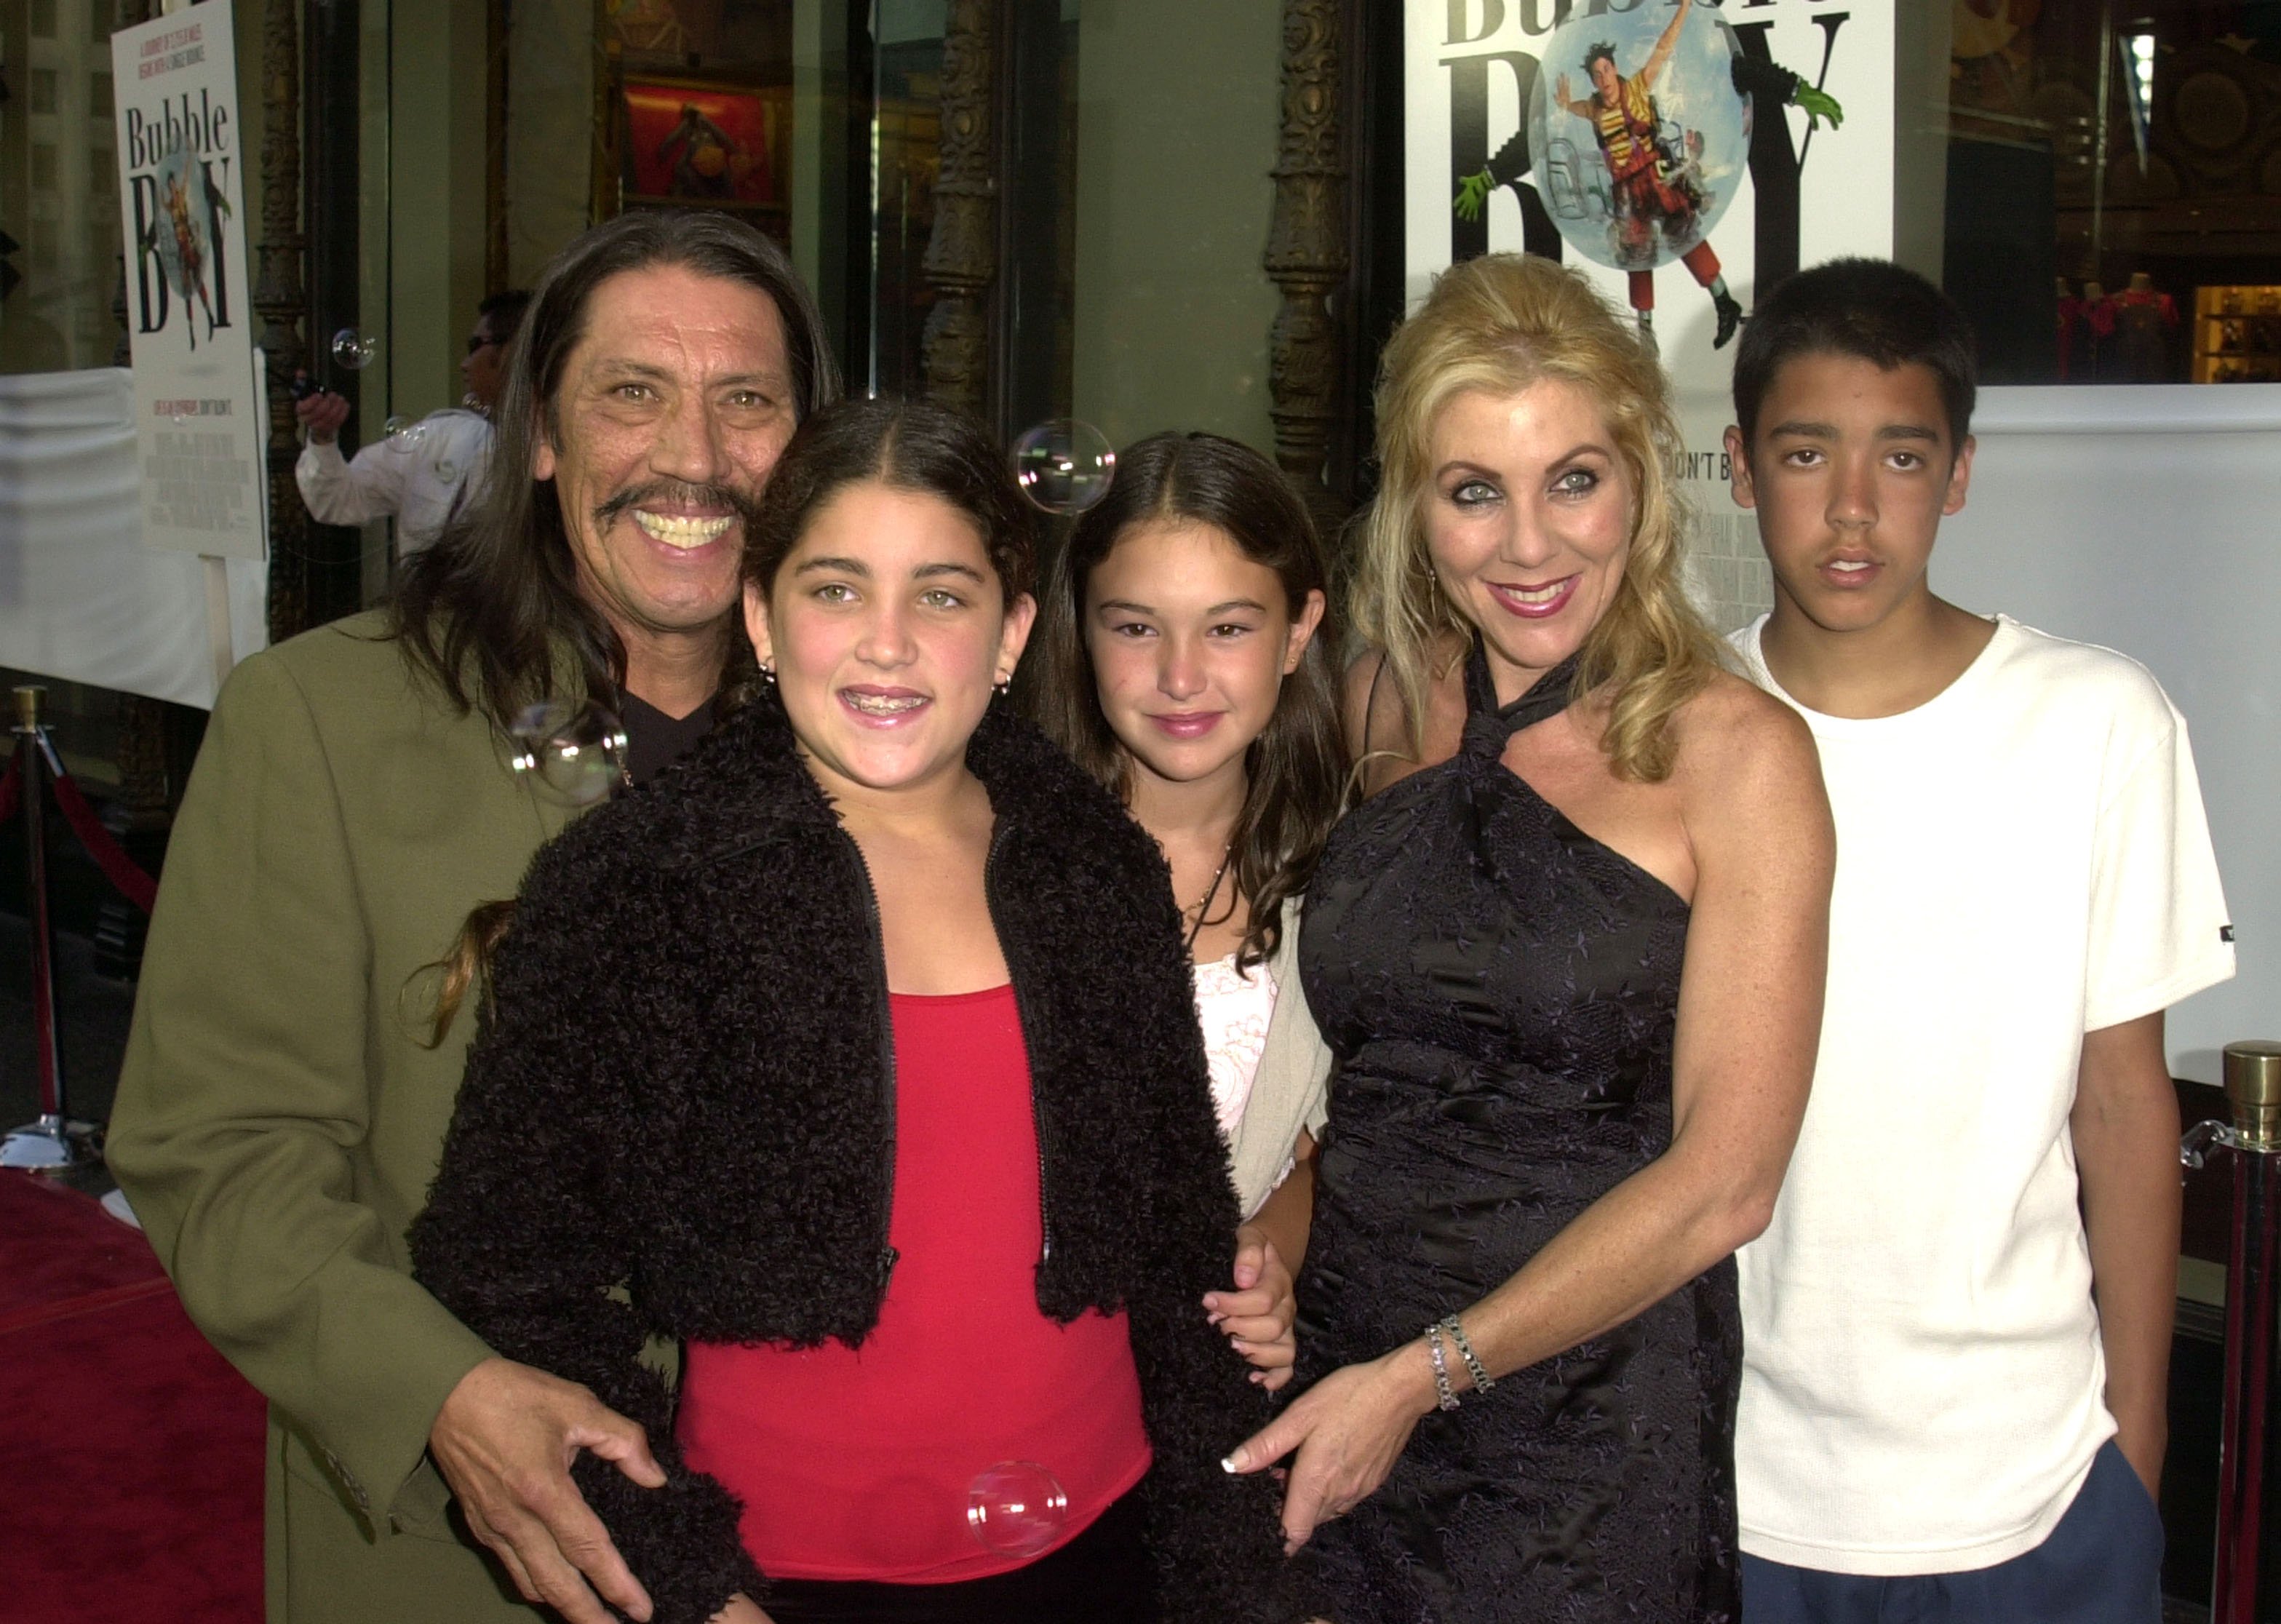 Danny Trejo, and his wife Debbie, together with their children Rebecca, Danielle, and Gilbert, attend the 